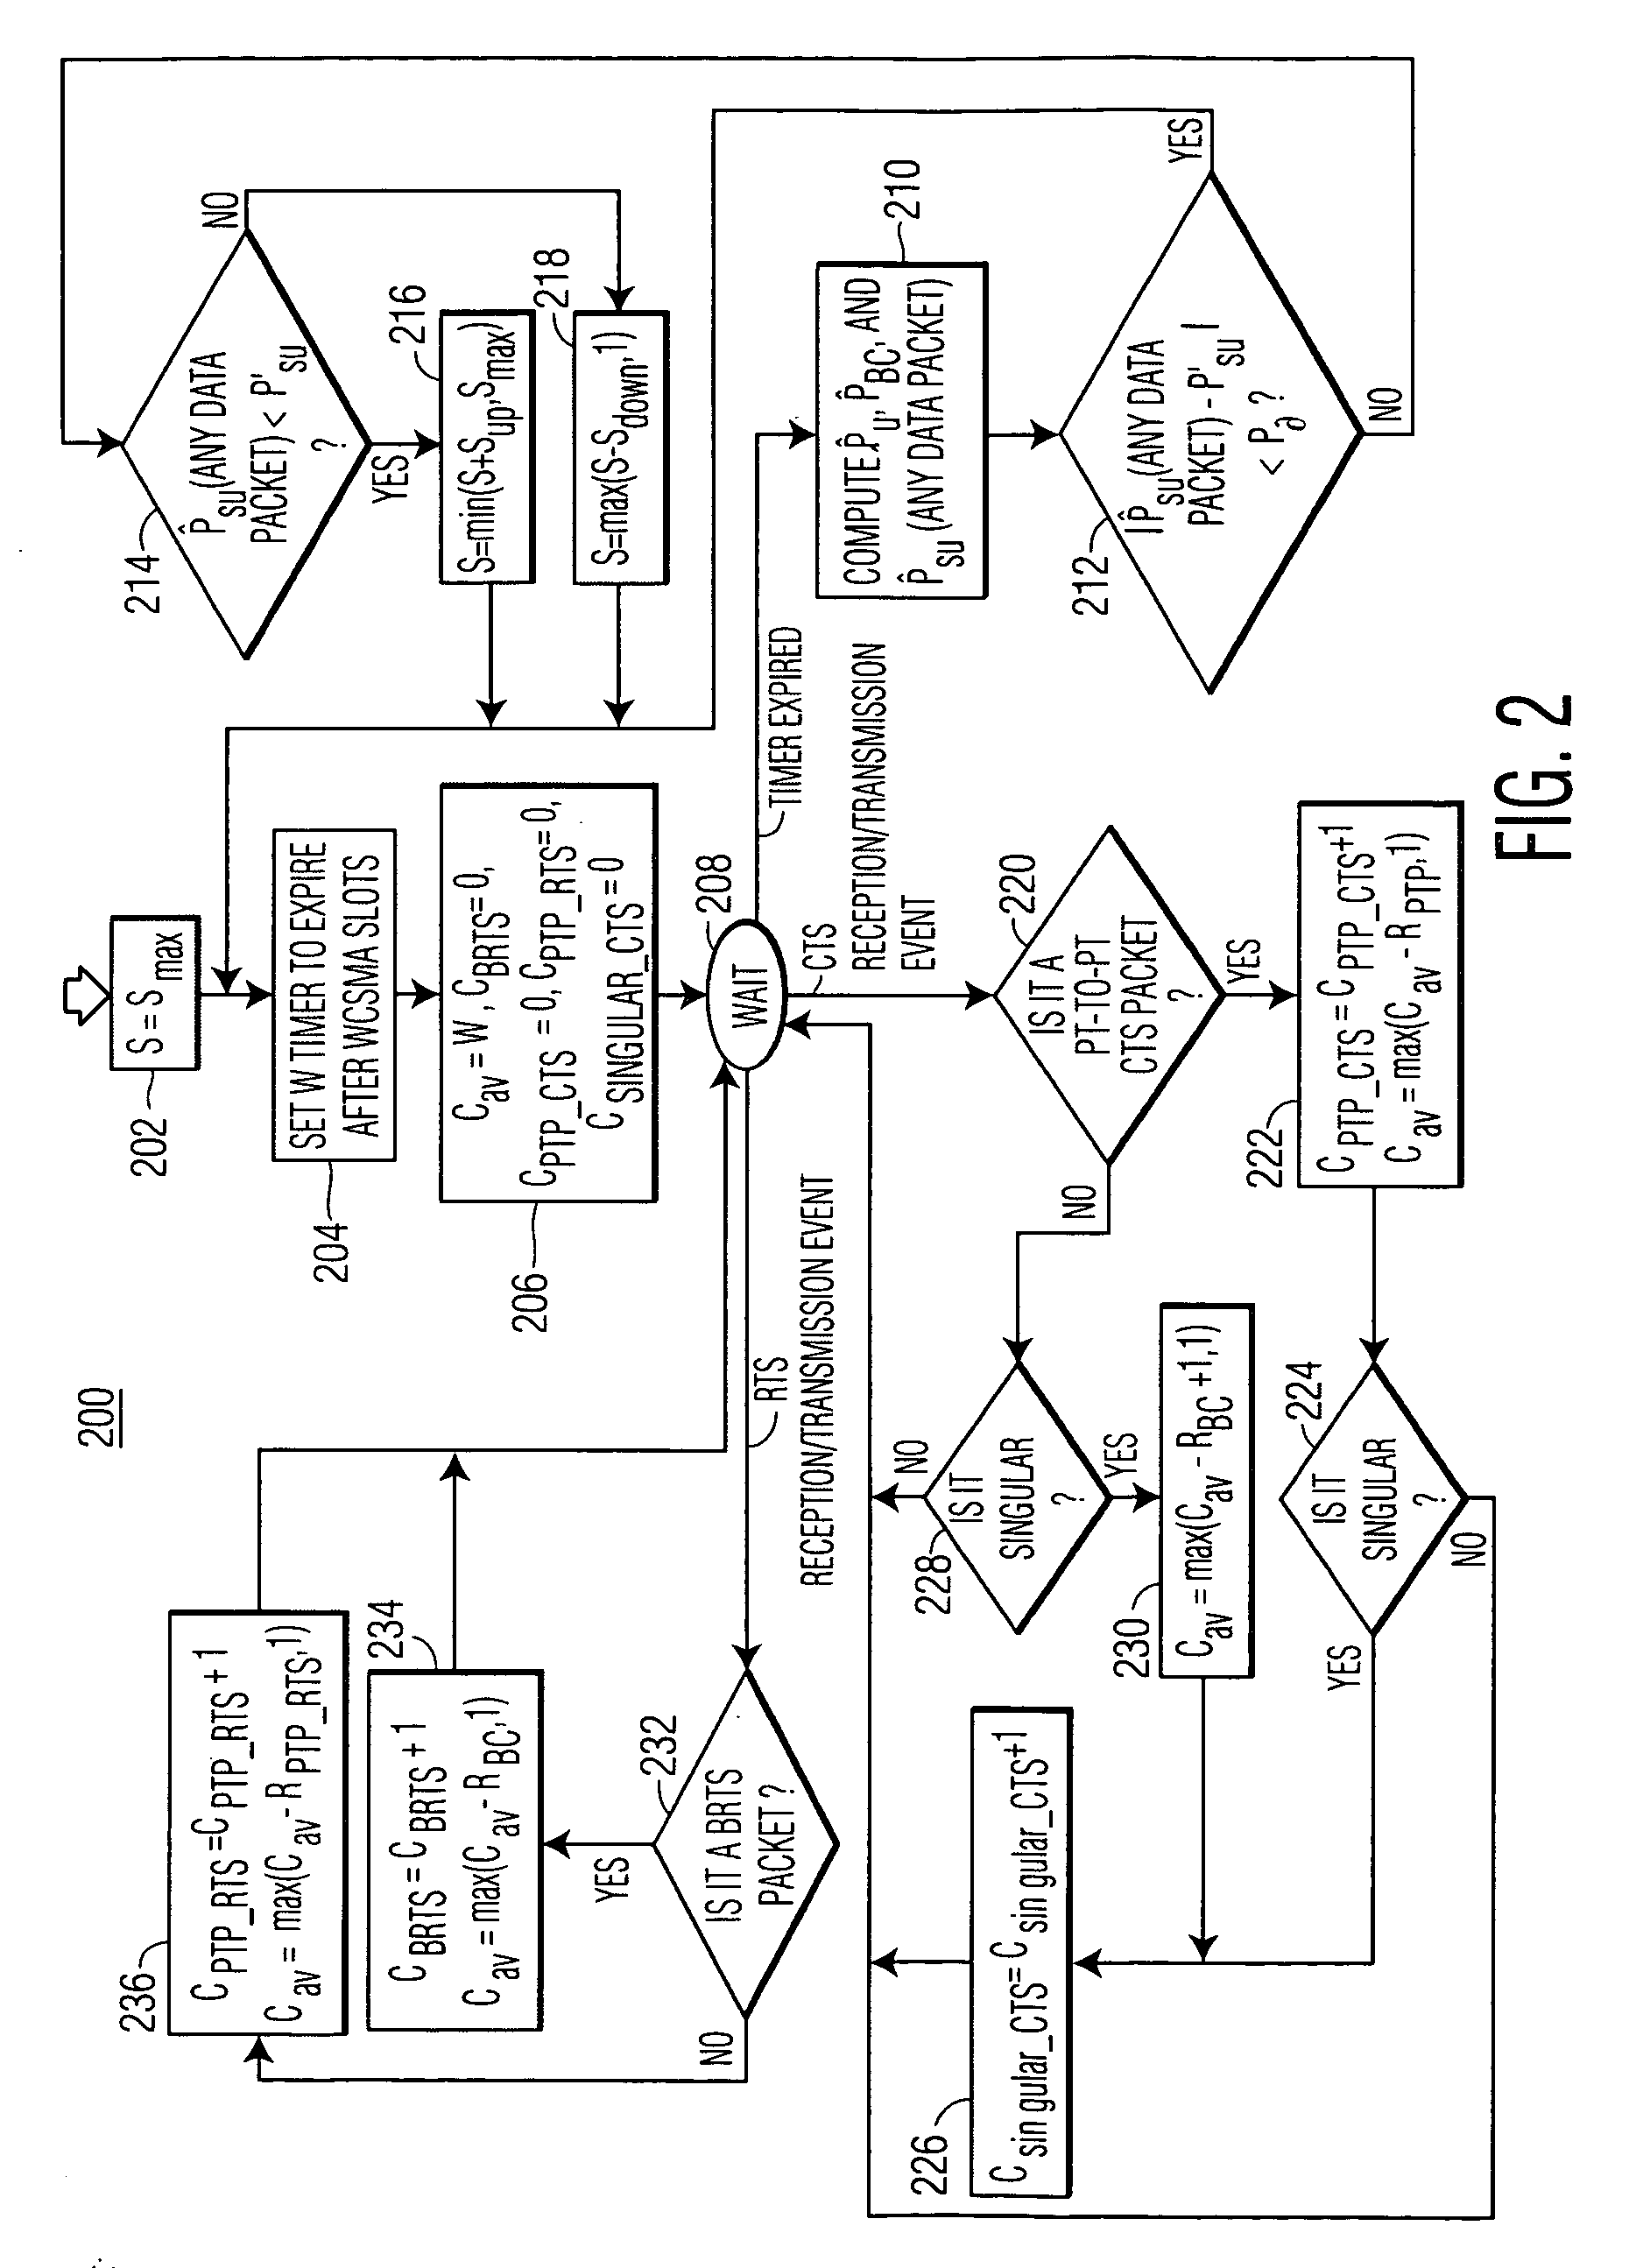 Adaptive channel access for carrier sense multiple access based systems